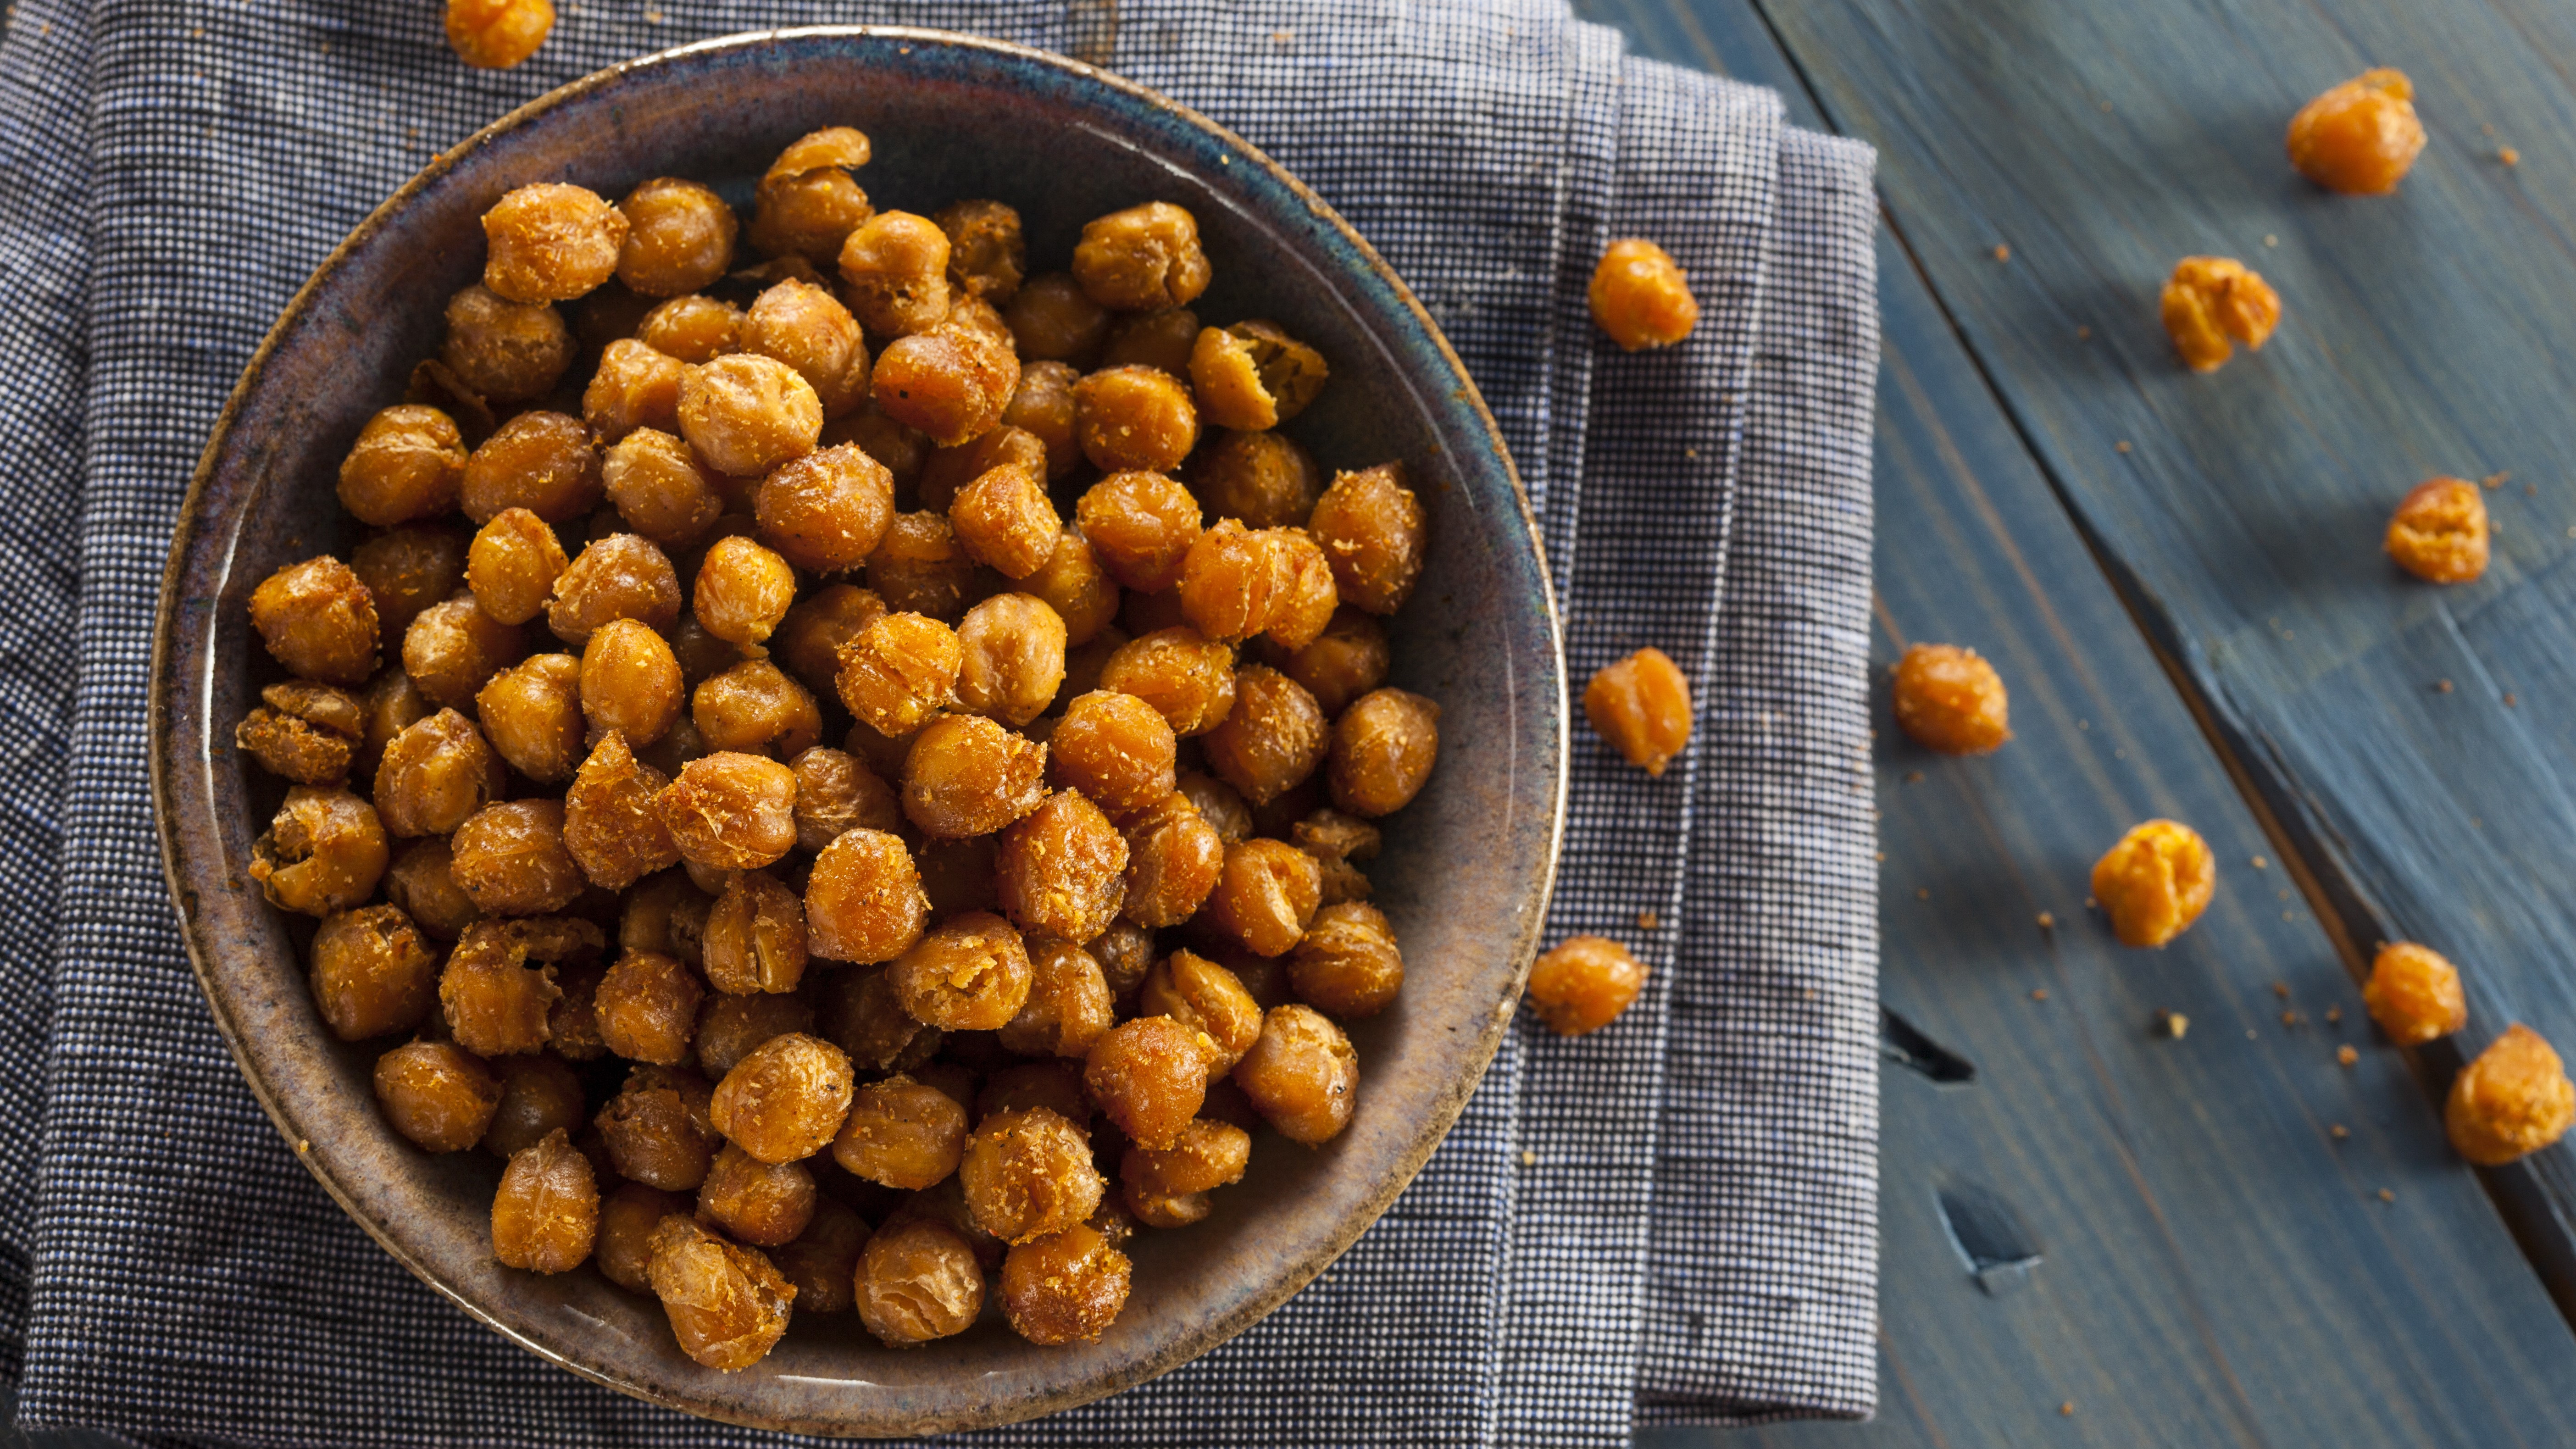 a photo of some roasted chickpeas